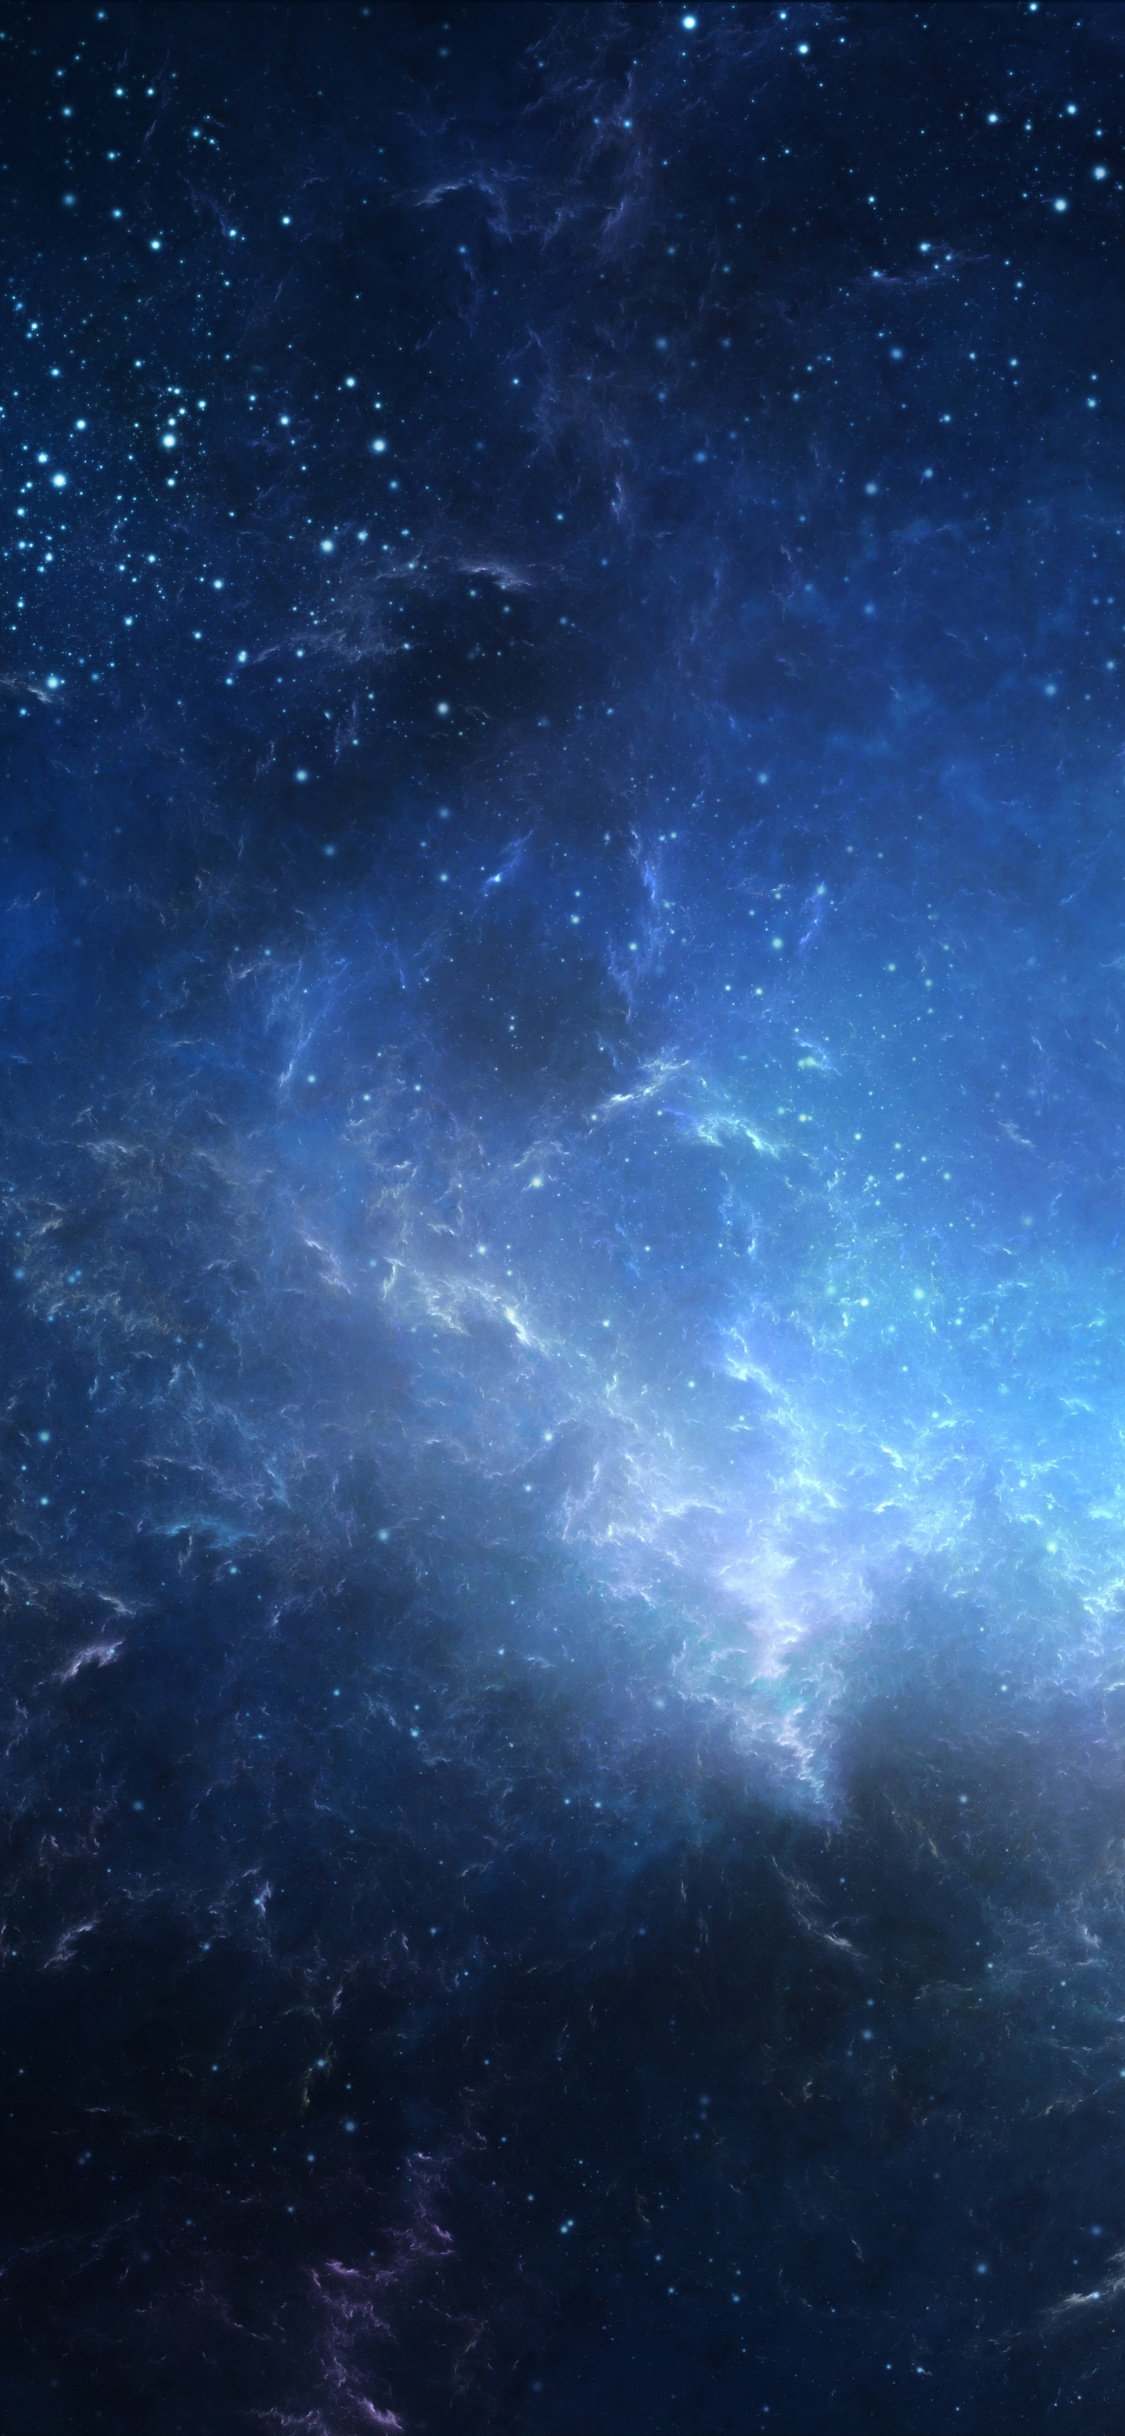 Blue and White Starry Night. Wallpaper in 1125x2436 Resolution